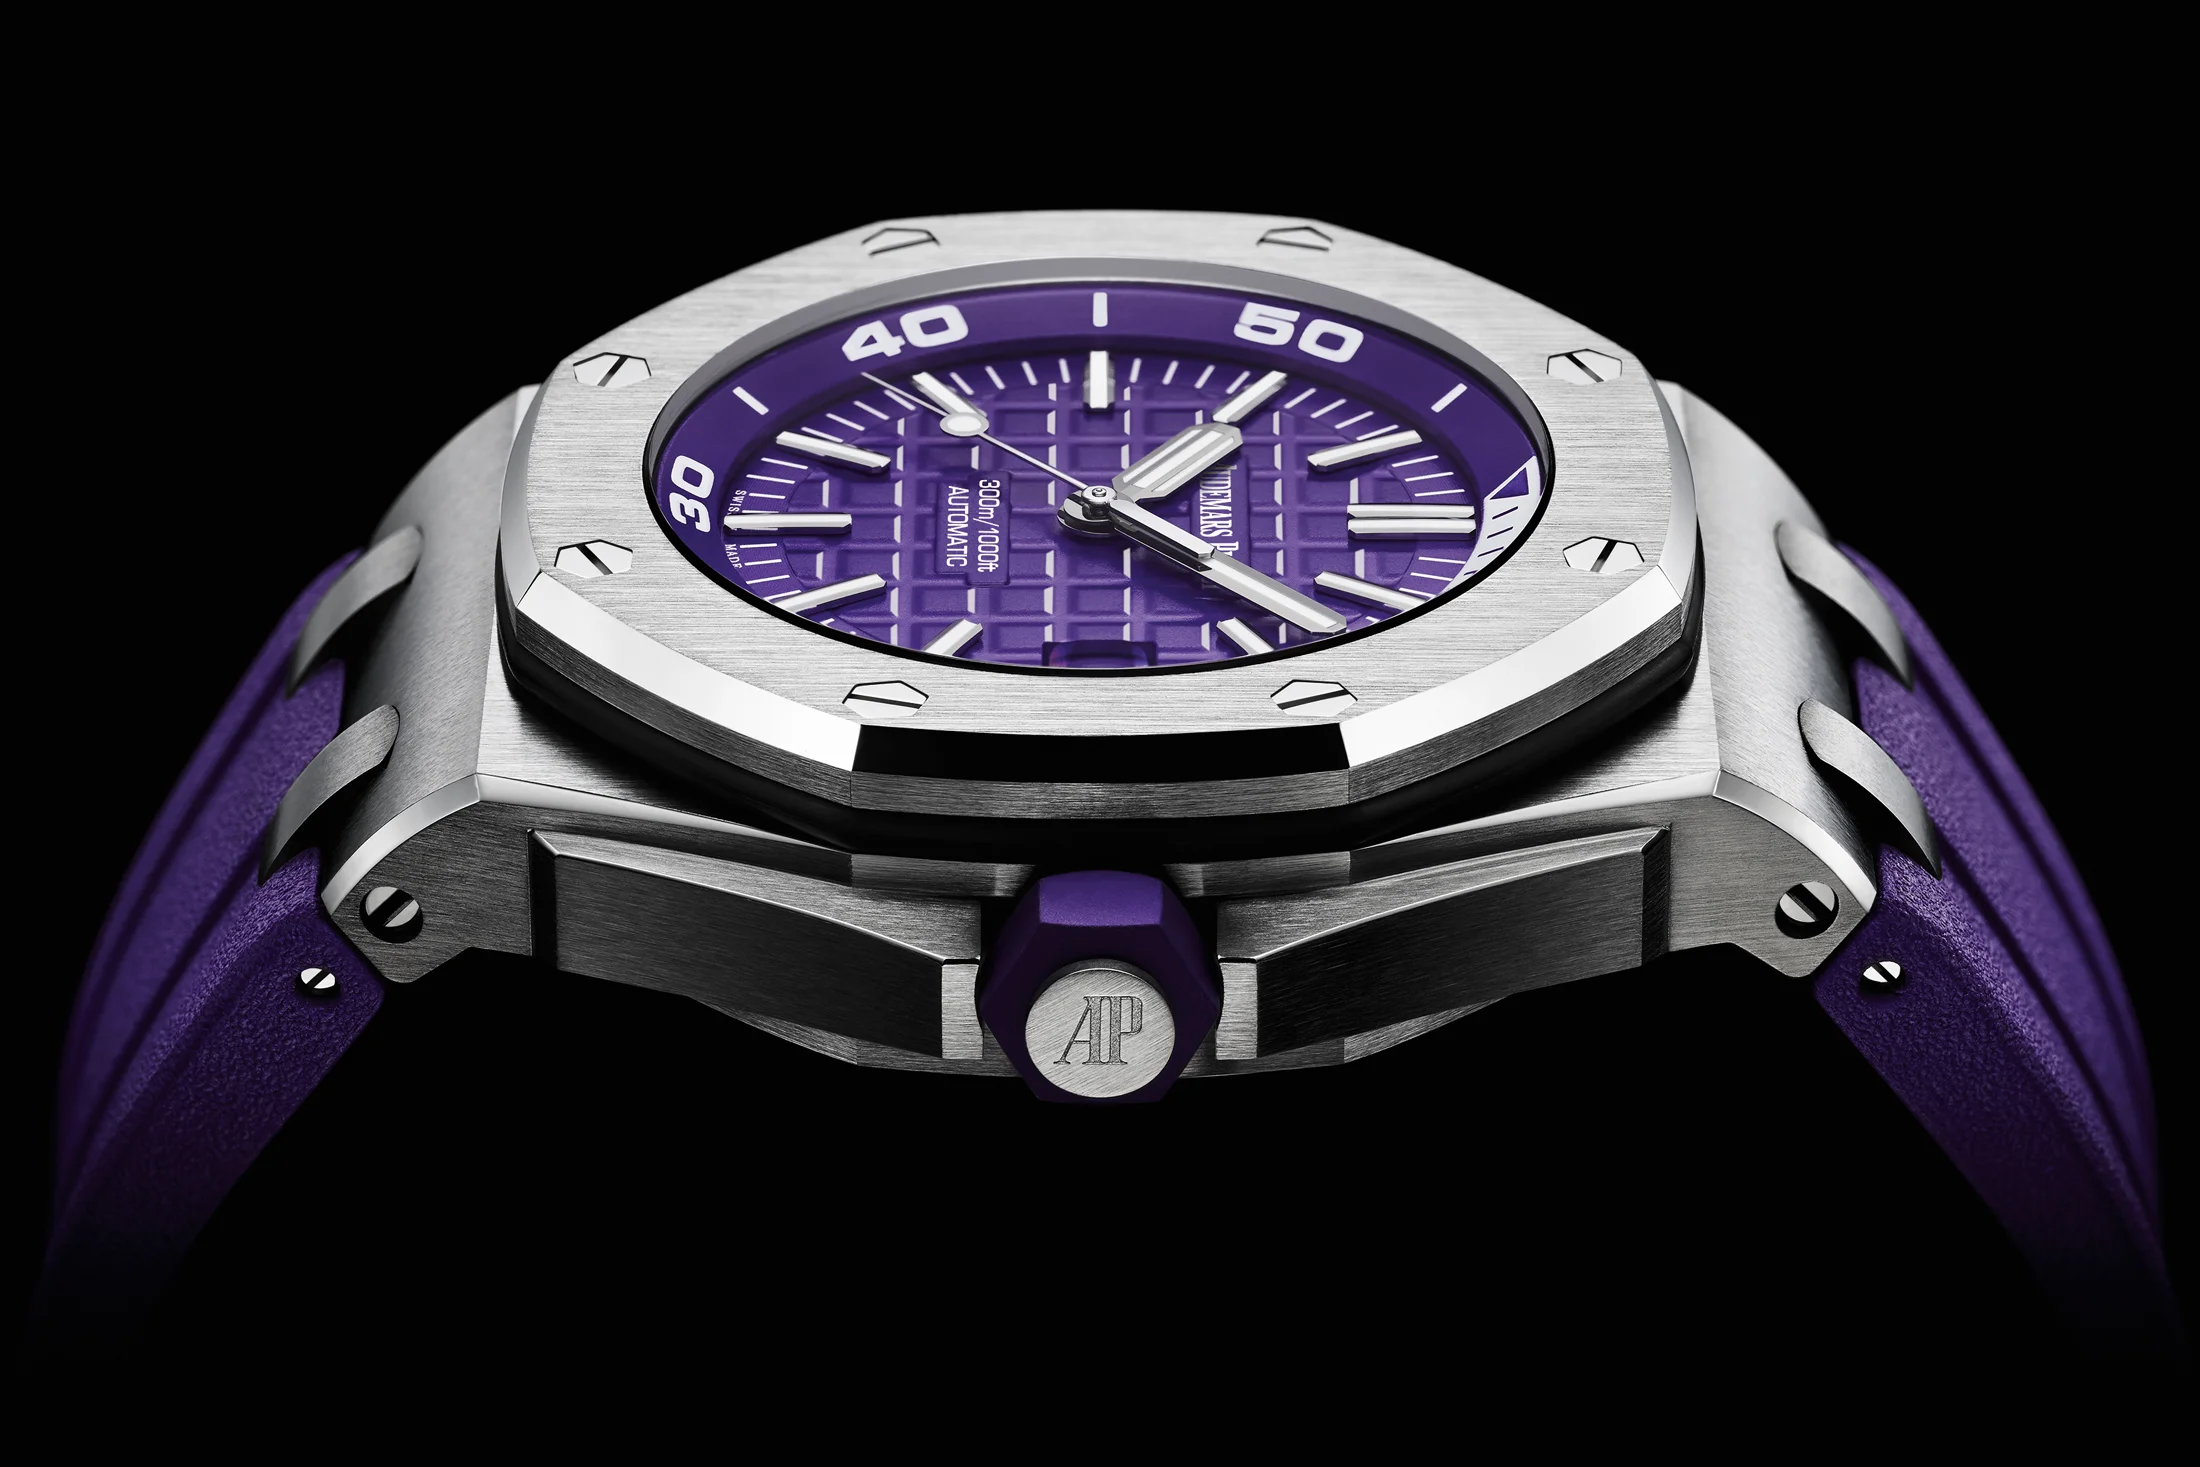 Introducing: The Audemars Piguet Royal Oak Offshore Diver In New Colors For  2018 - Hodinkee